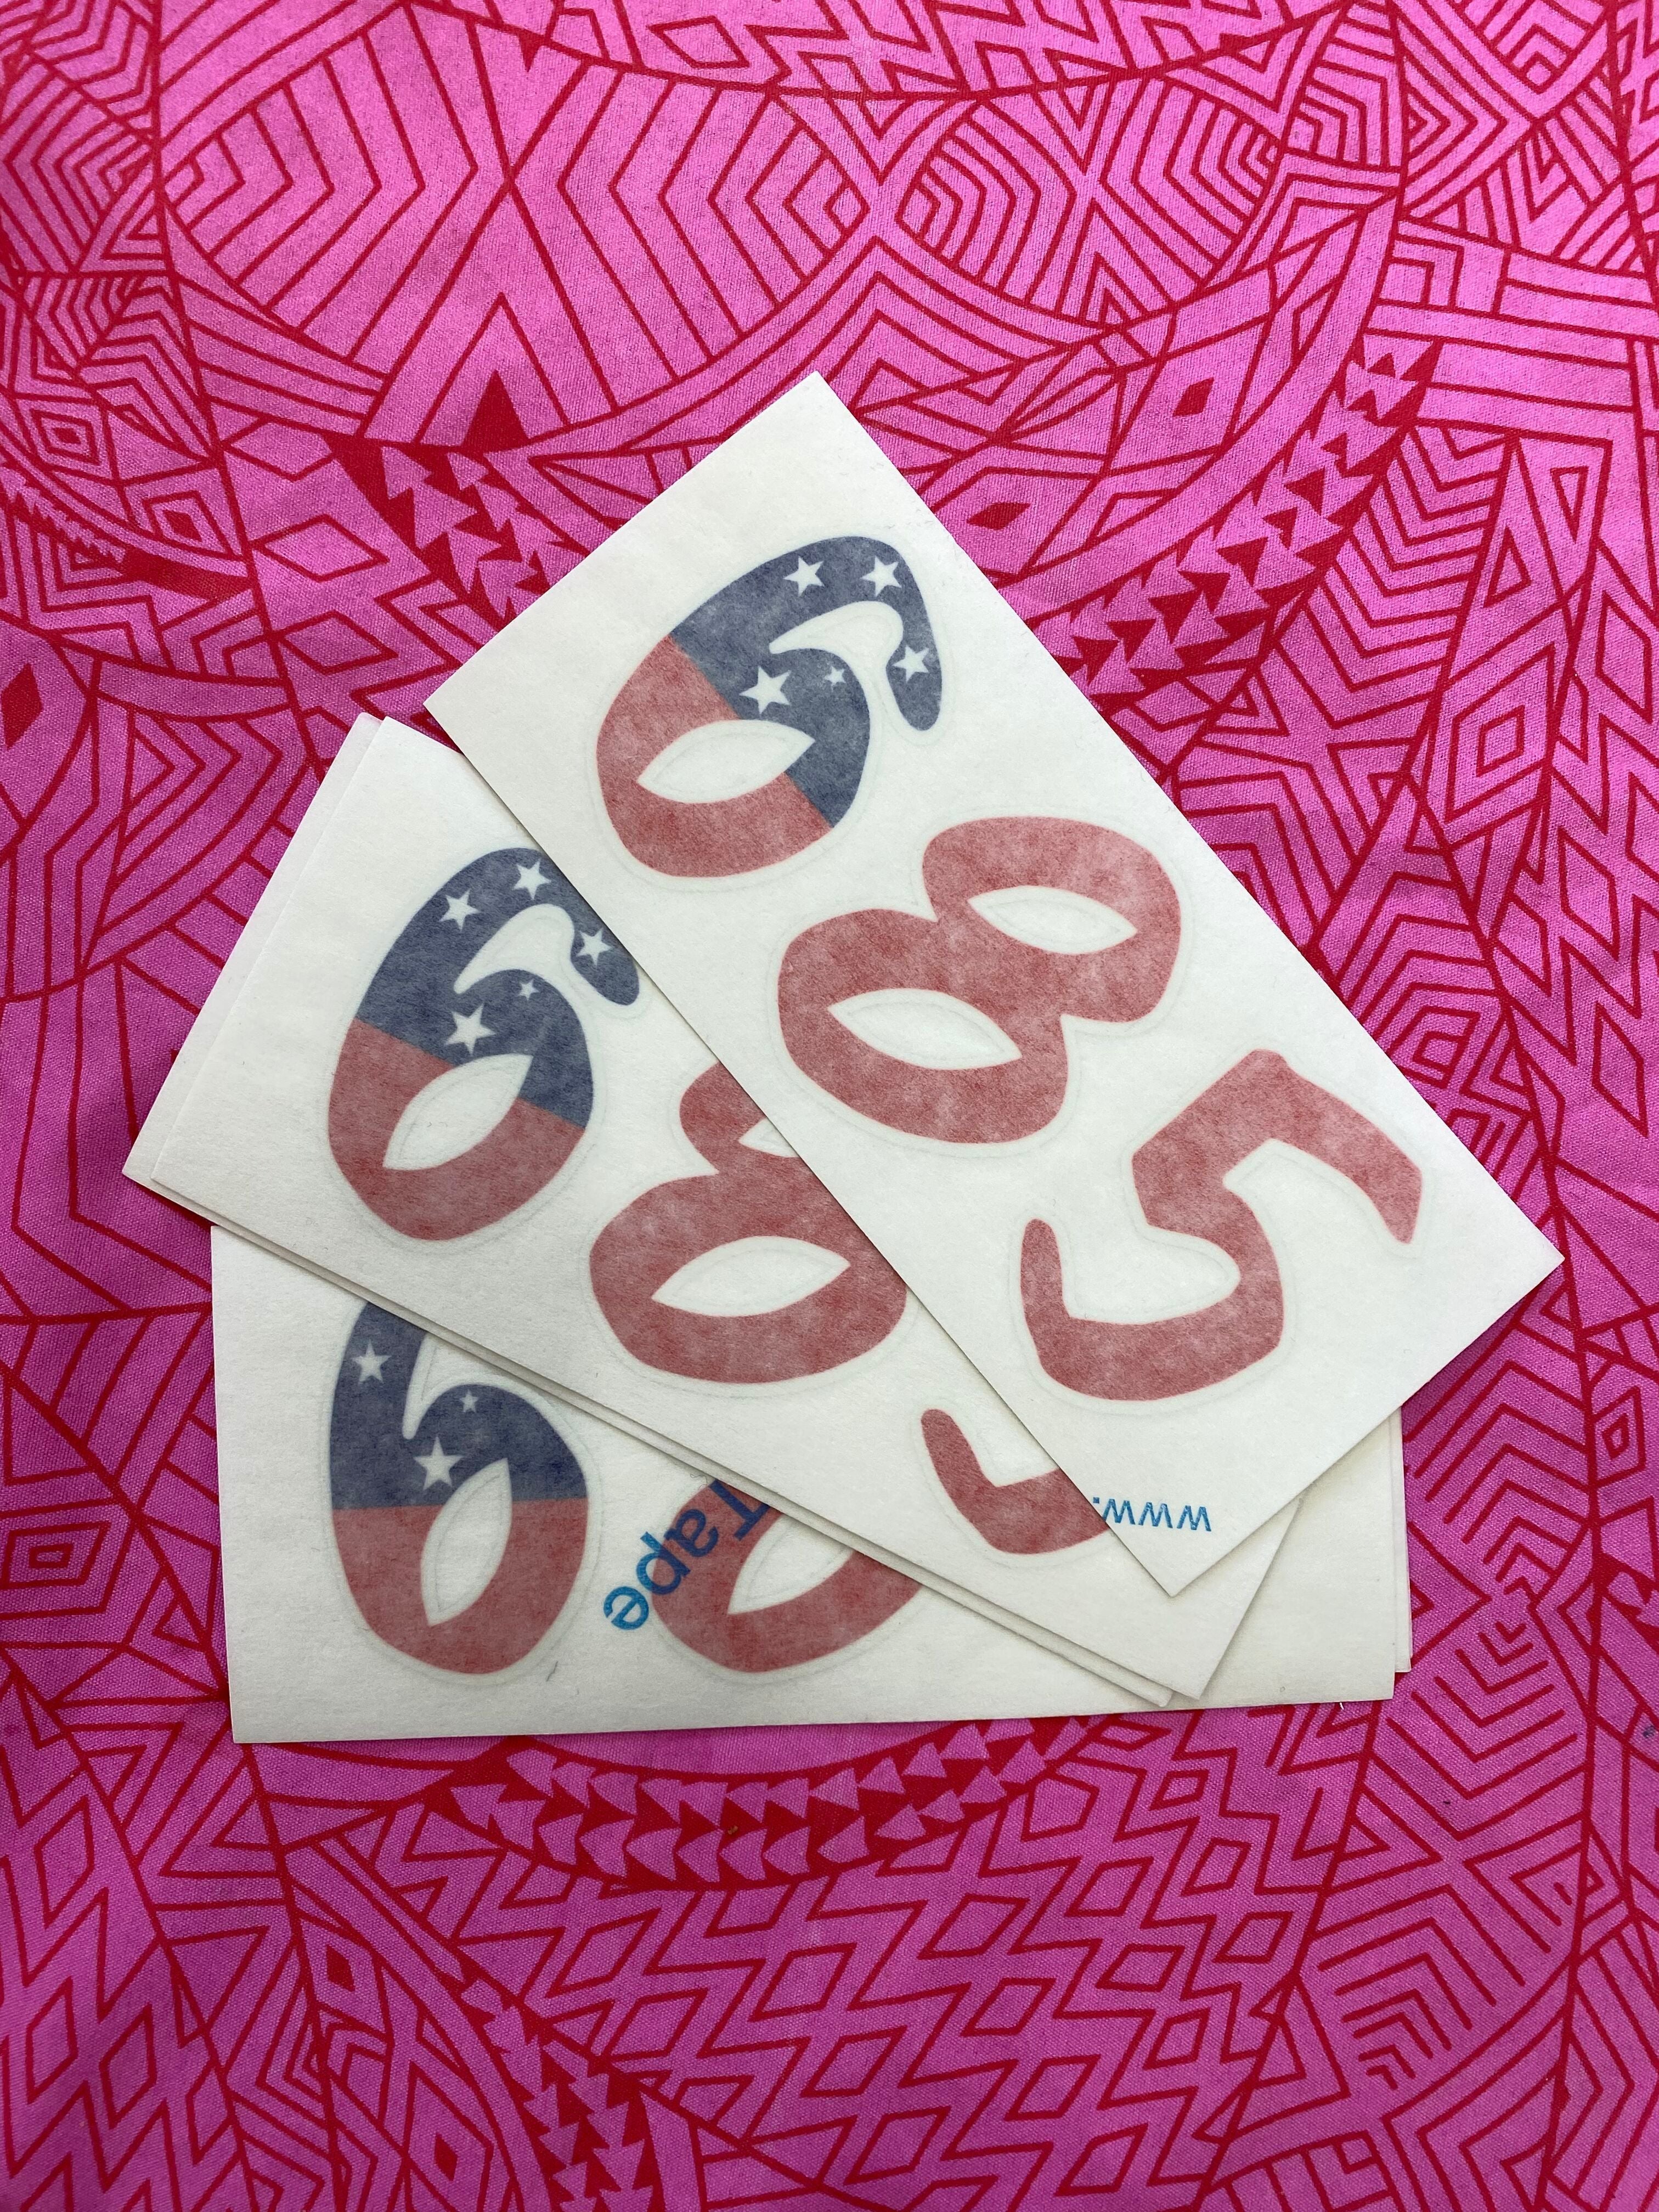 685 Stickers by Amanda Stowers